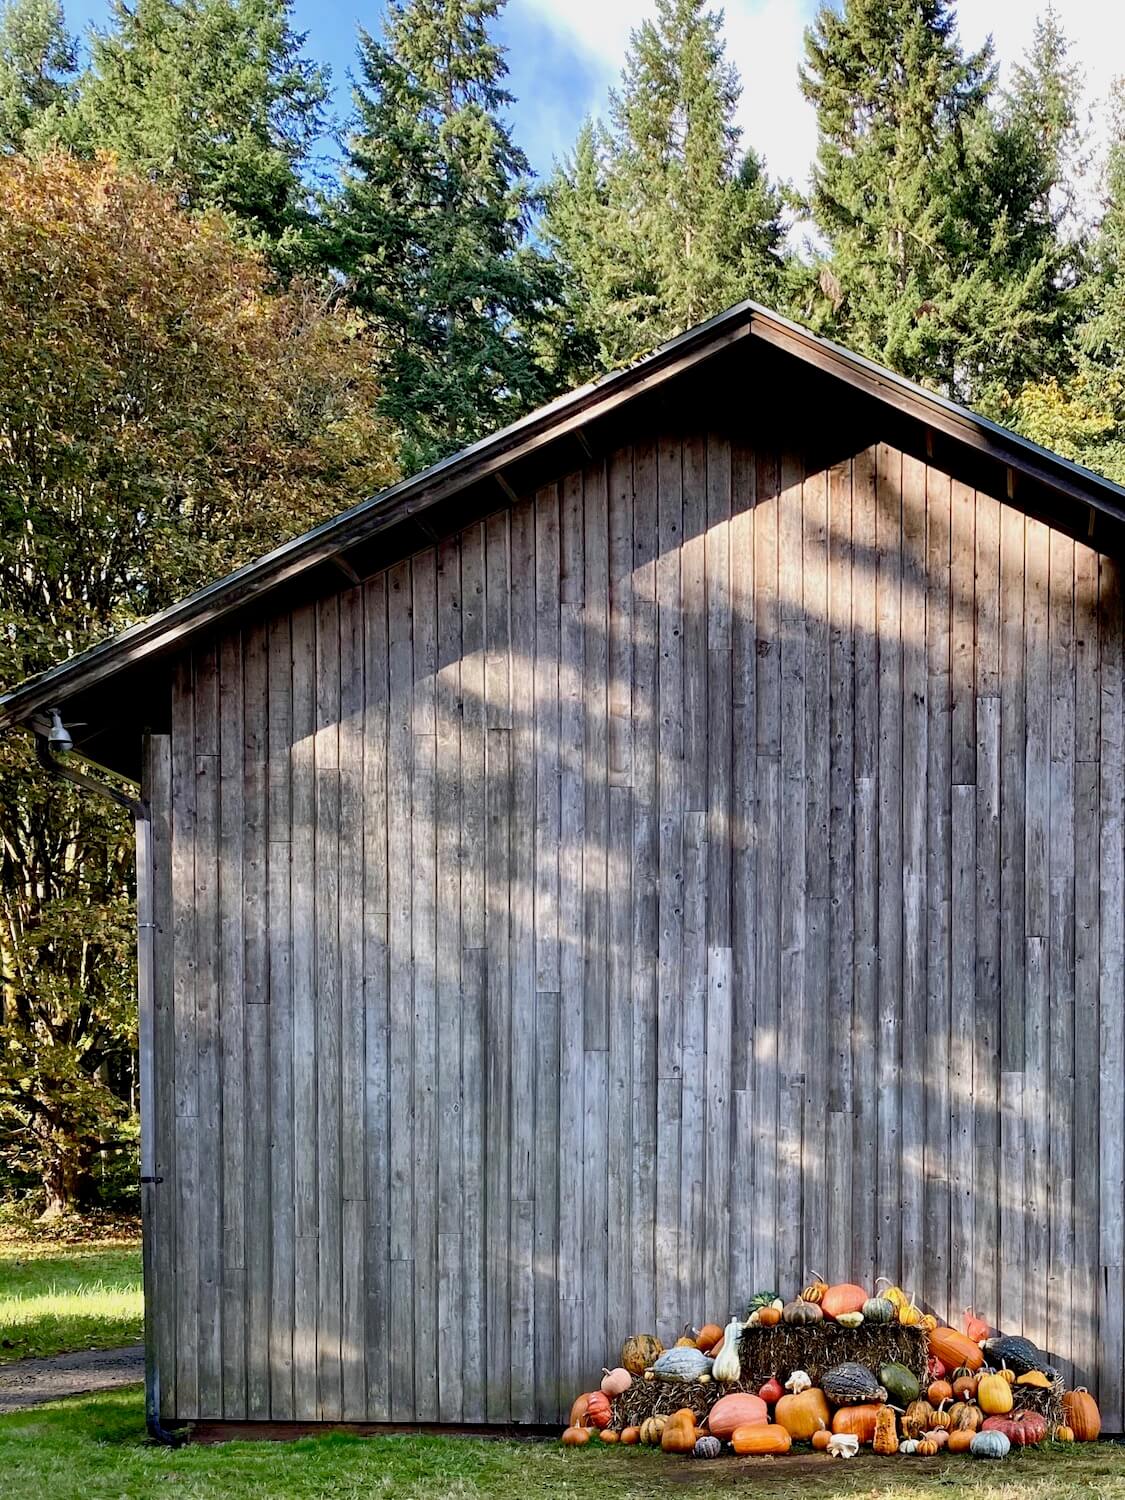 An old wooden barn stands proudly amongst fir trees under a blue sky. Several hay bales are set up with hundreds of orange red and yellow gourds strategically displayed around them for the Autumn season.